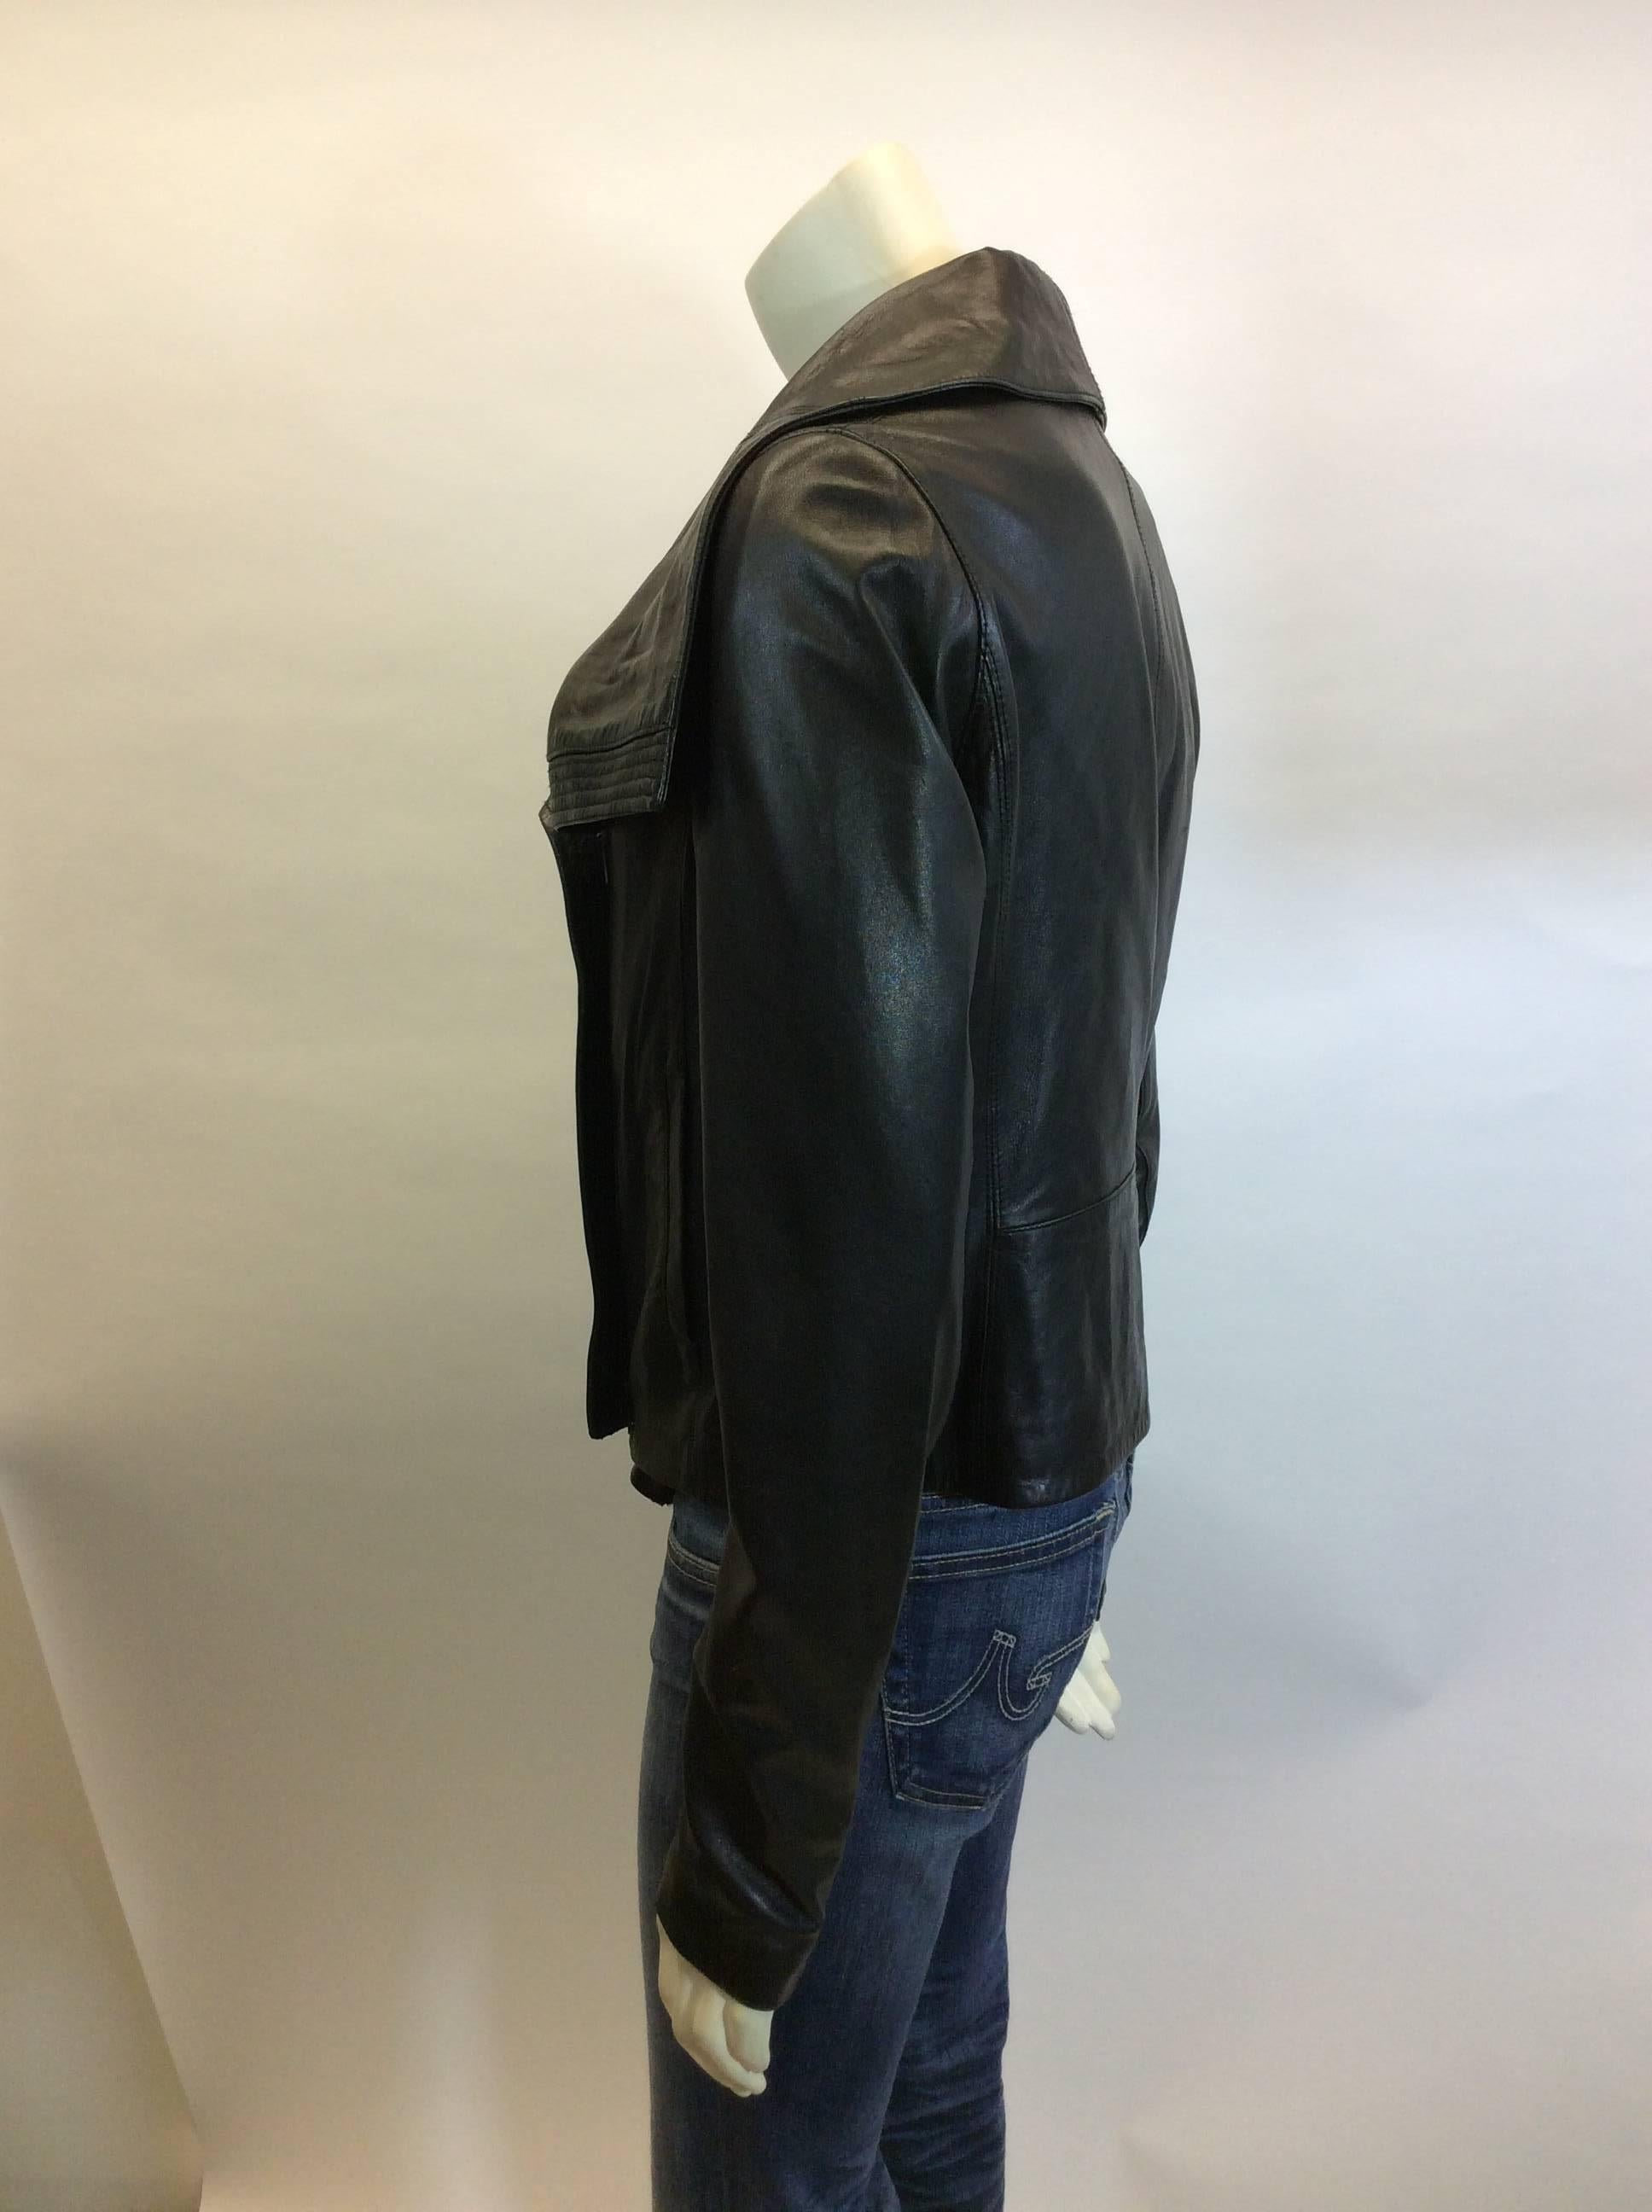 Vince Black Leather Moto Jacket
100% leather exterior, cotton lined interior
Two front pockets, zippers on wrists
Fold over collar
Size medium
Made in China
$400